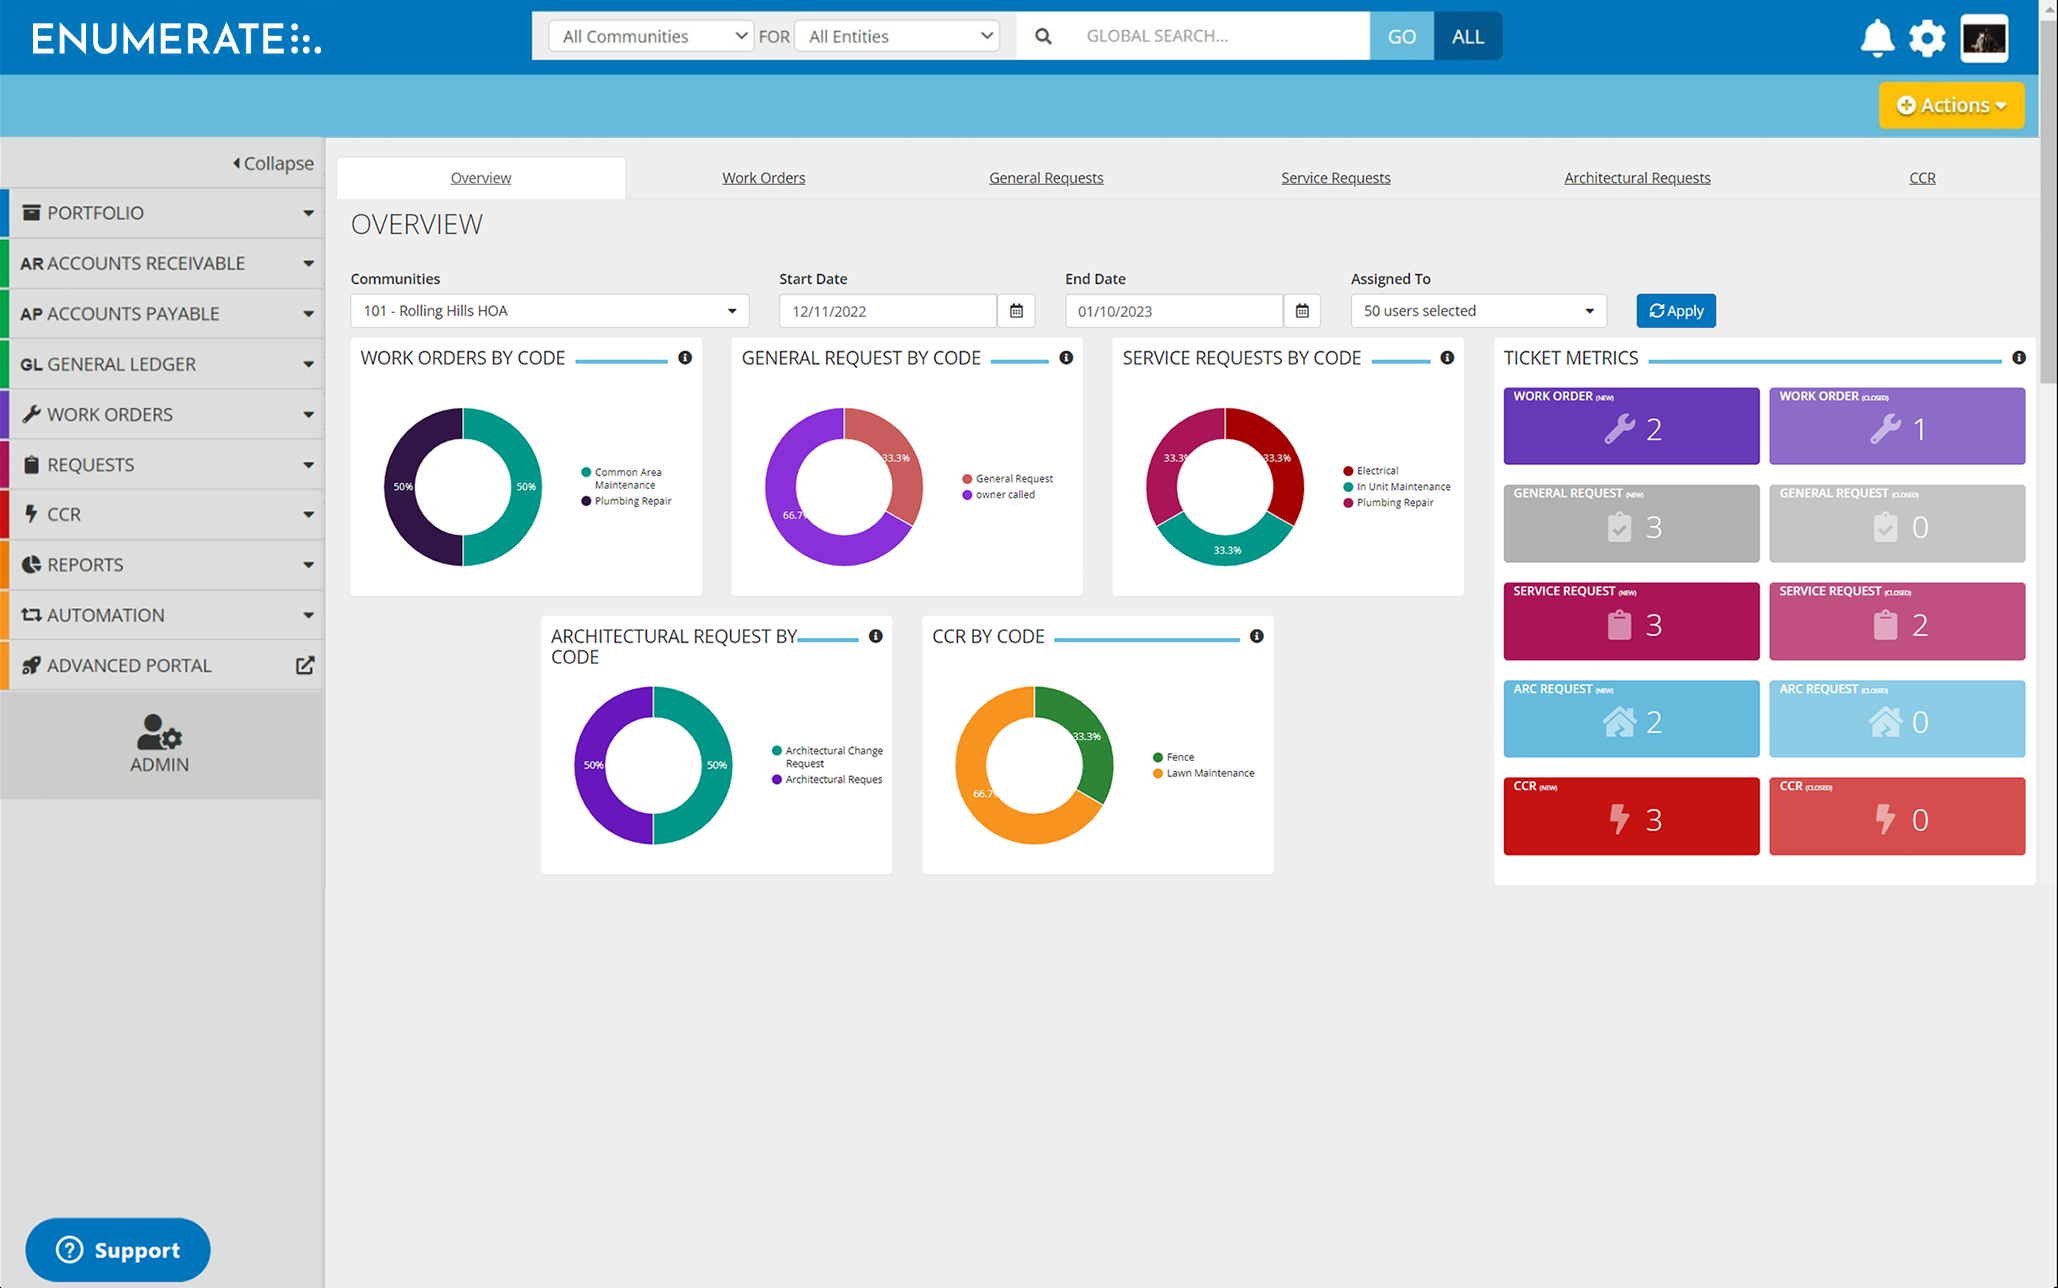 Enumerate Software - Community Actions Dashboard